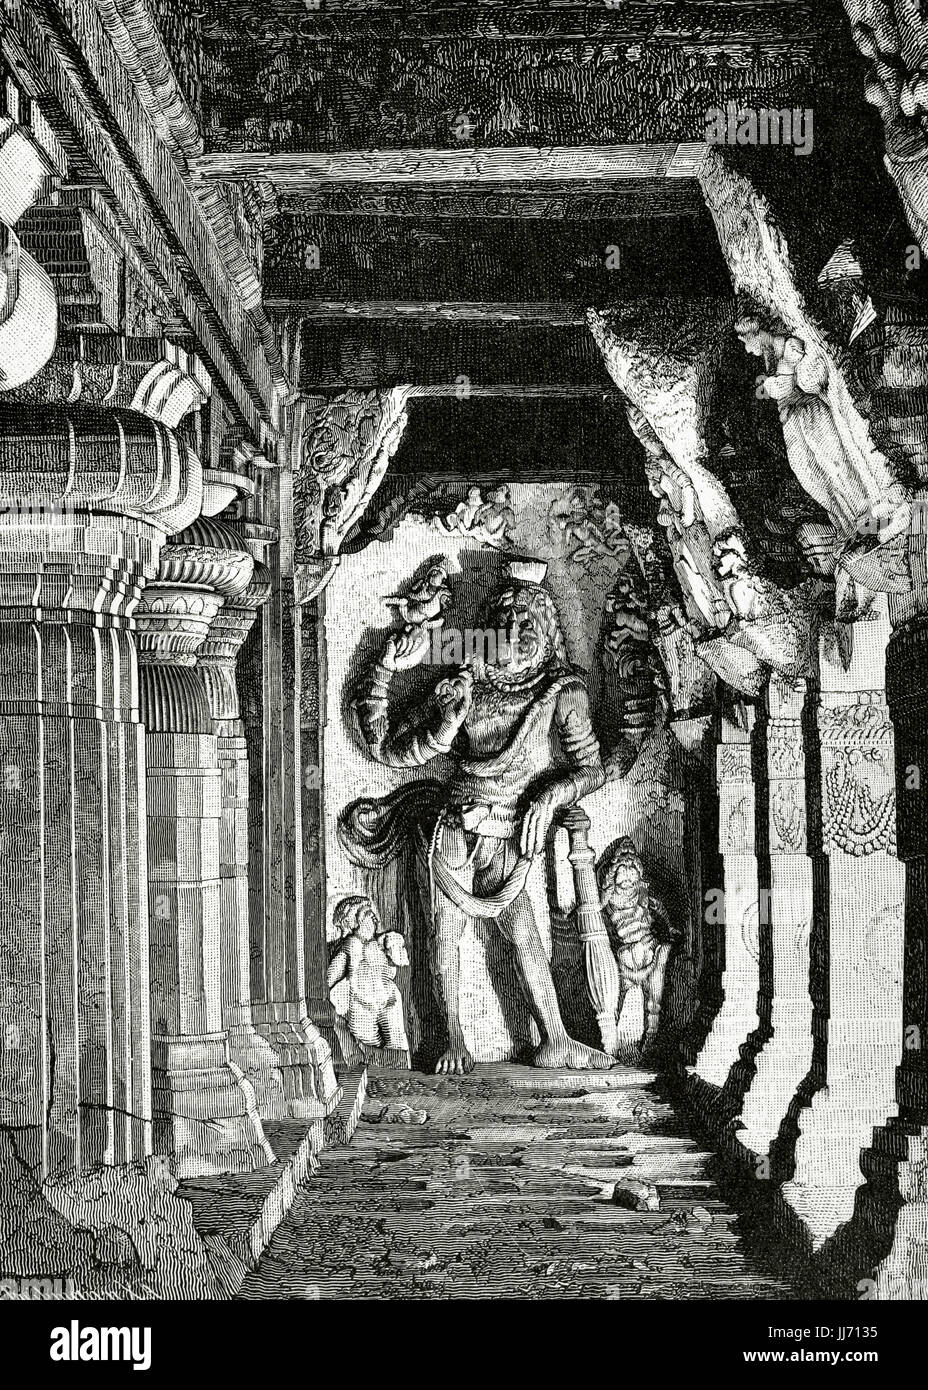 Hinduism. Relief depicting God Vishnu with lion's head in the Temple of Arisimba, India. Engraving by G. Treibmann. India, 1880. Stock Photo